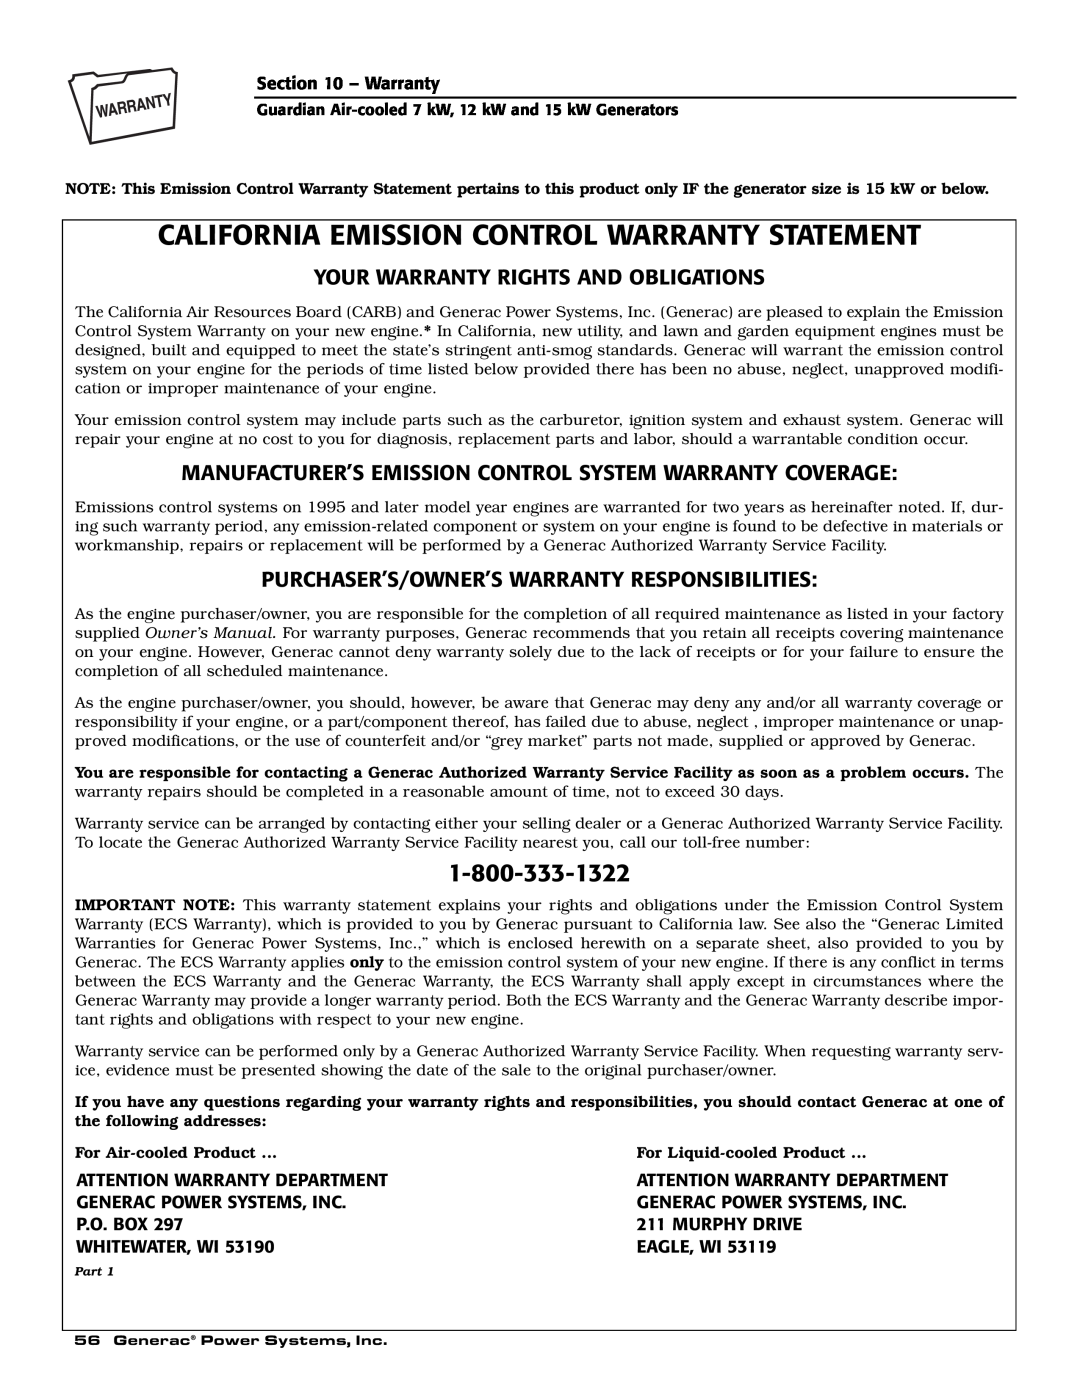 Generac 04389-1, 04456-1, 04390-1 California Emission Control Warranty Statement, Your Warranty Rights And Obligations 